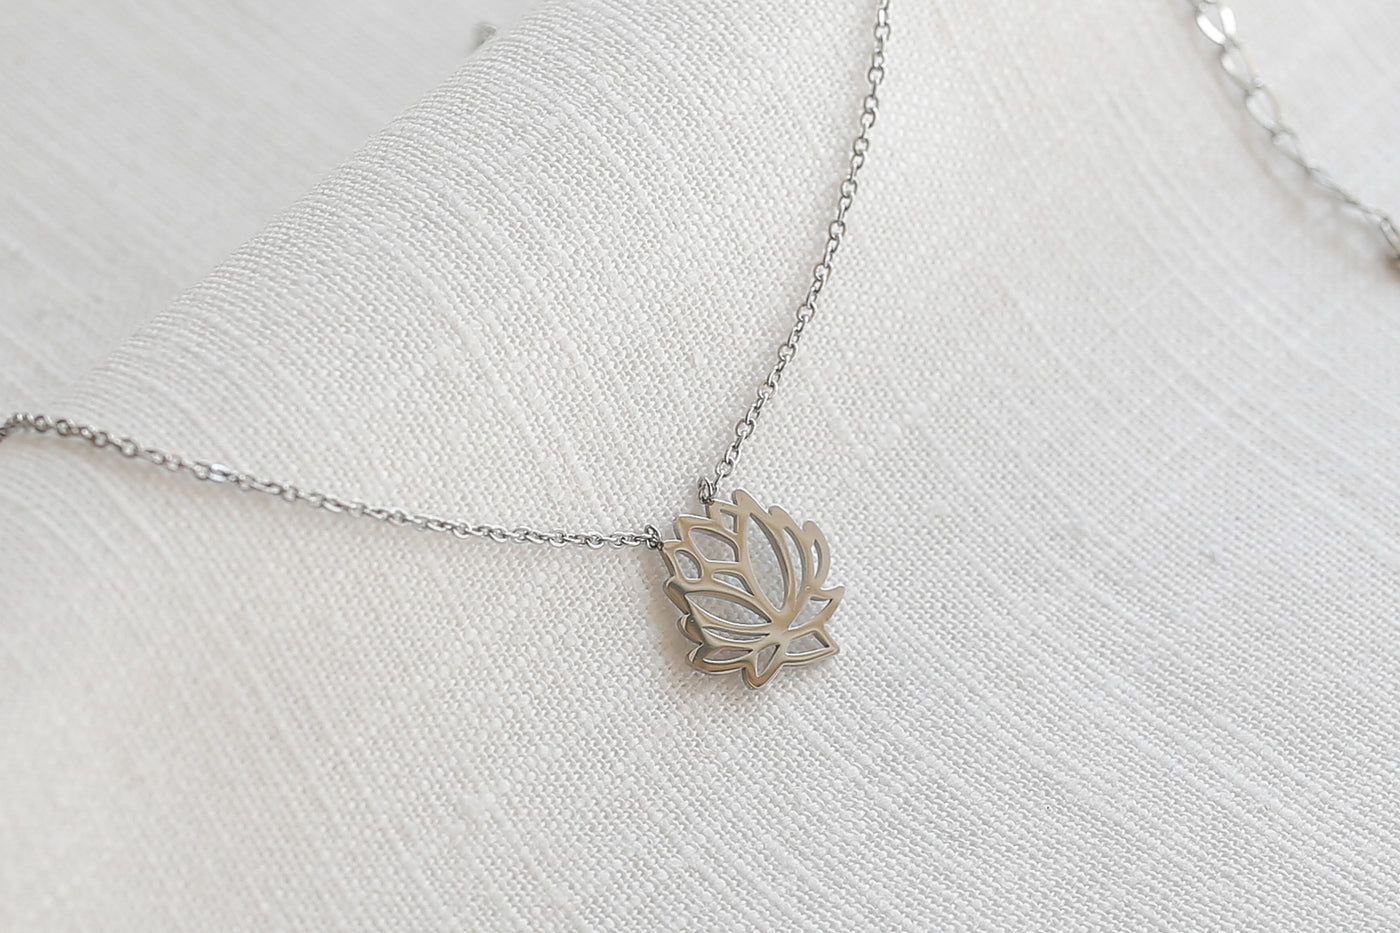 Necklace with lotus blossom pendant and Happiness greeting card